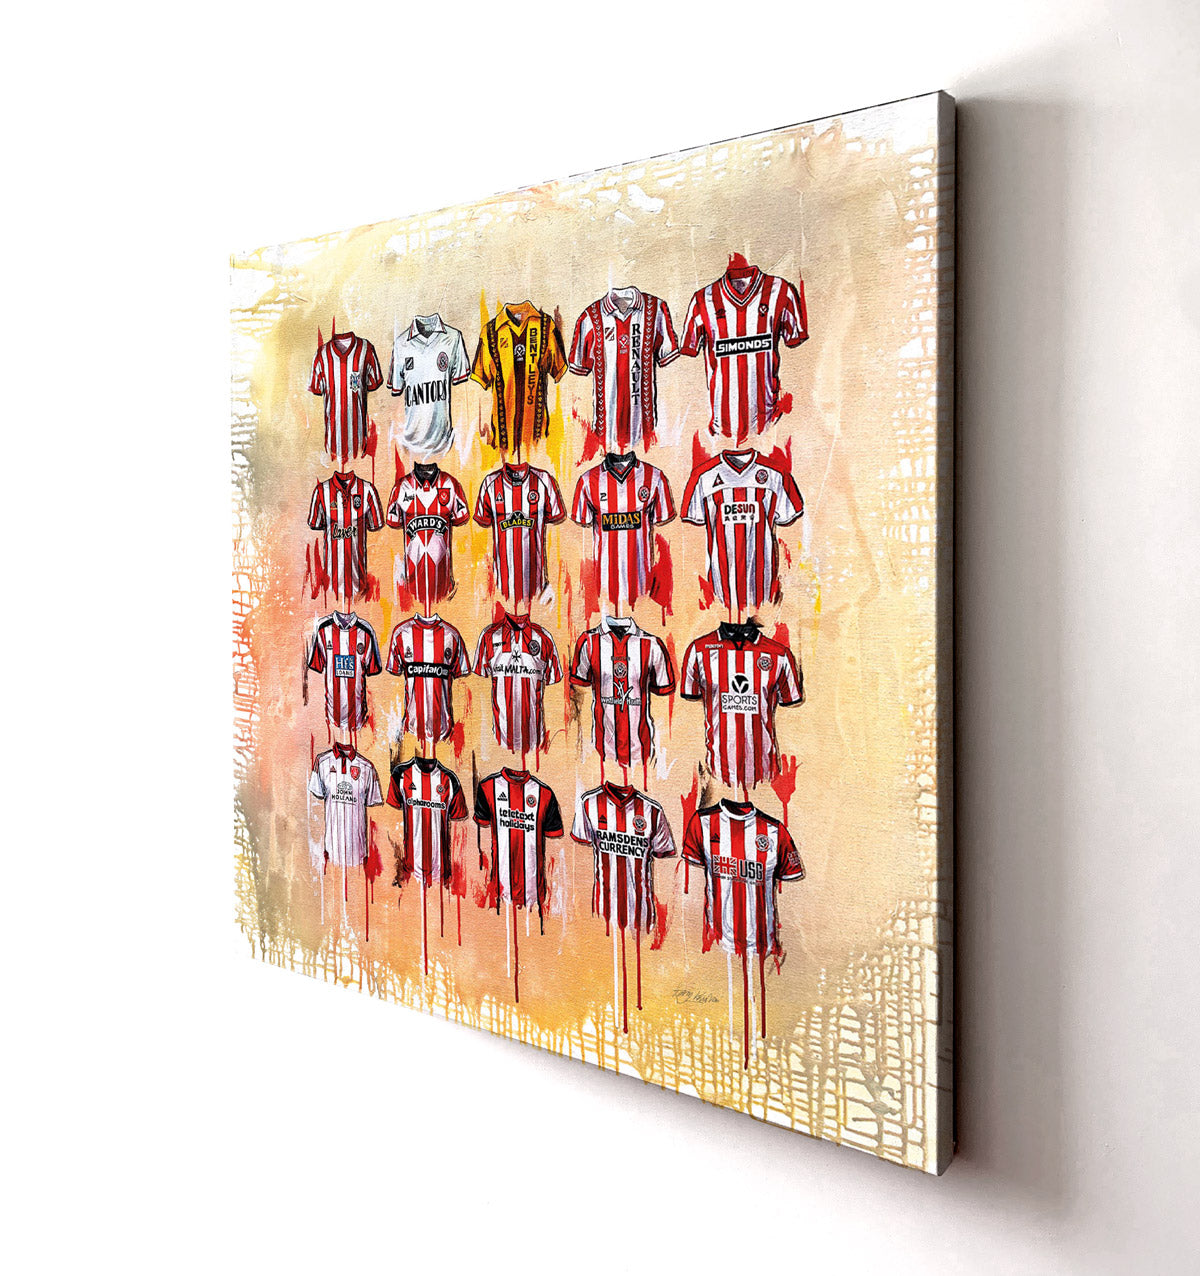 Capture the essence of Sheffield United with Terry Kneeshaw's Canvases, available in various sizes (20x20, 30x30, or 40x40) and framed or unframed black floating frame. Featuring artwork of the team, these canvases are a must-have for fans. Each canvas showcases Sheffield United's iconic moments, symbols, and colors, ensuring that it is a true representation of the team's identity. Get your Sheffield United Canvases today and add them to your collection.